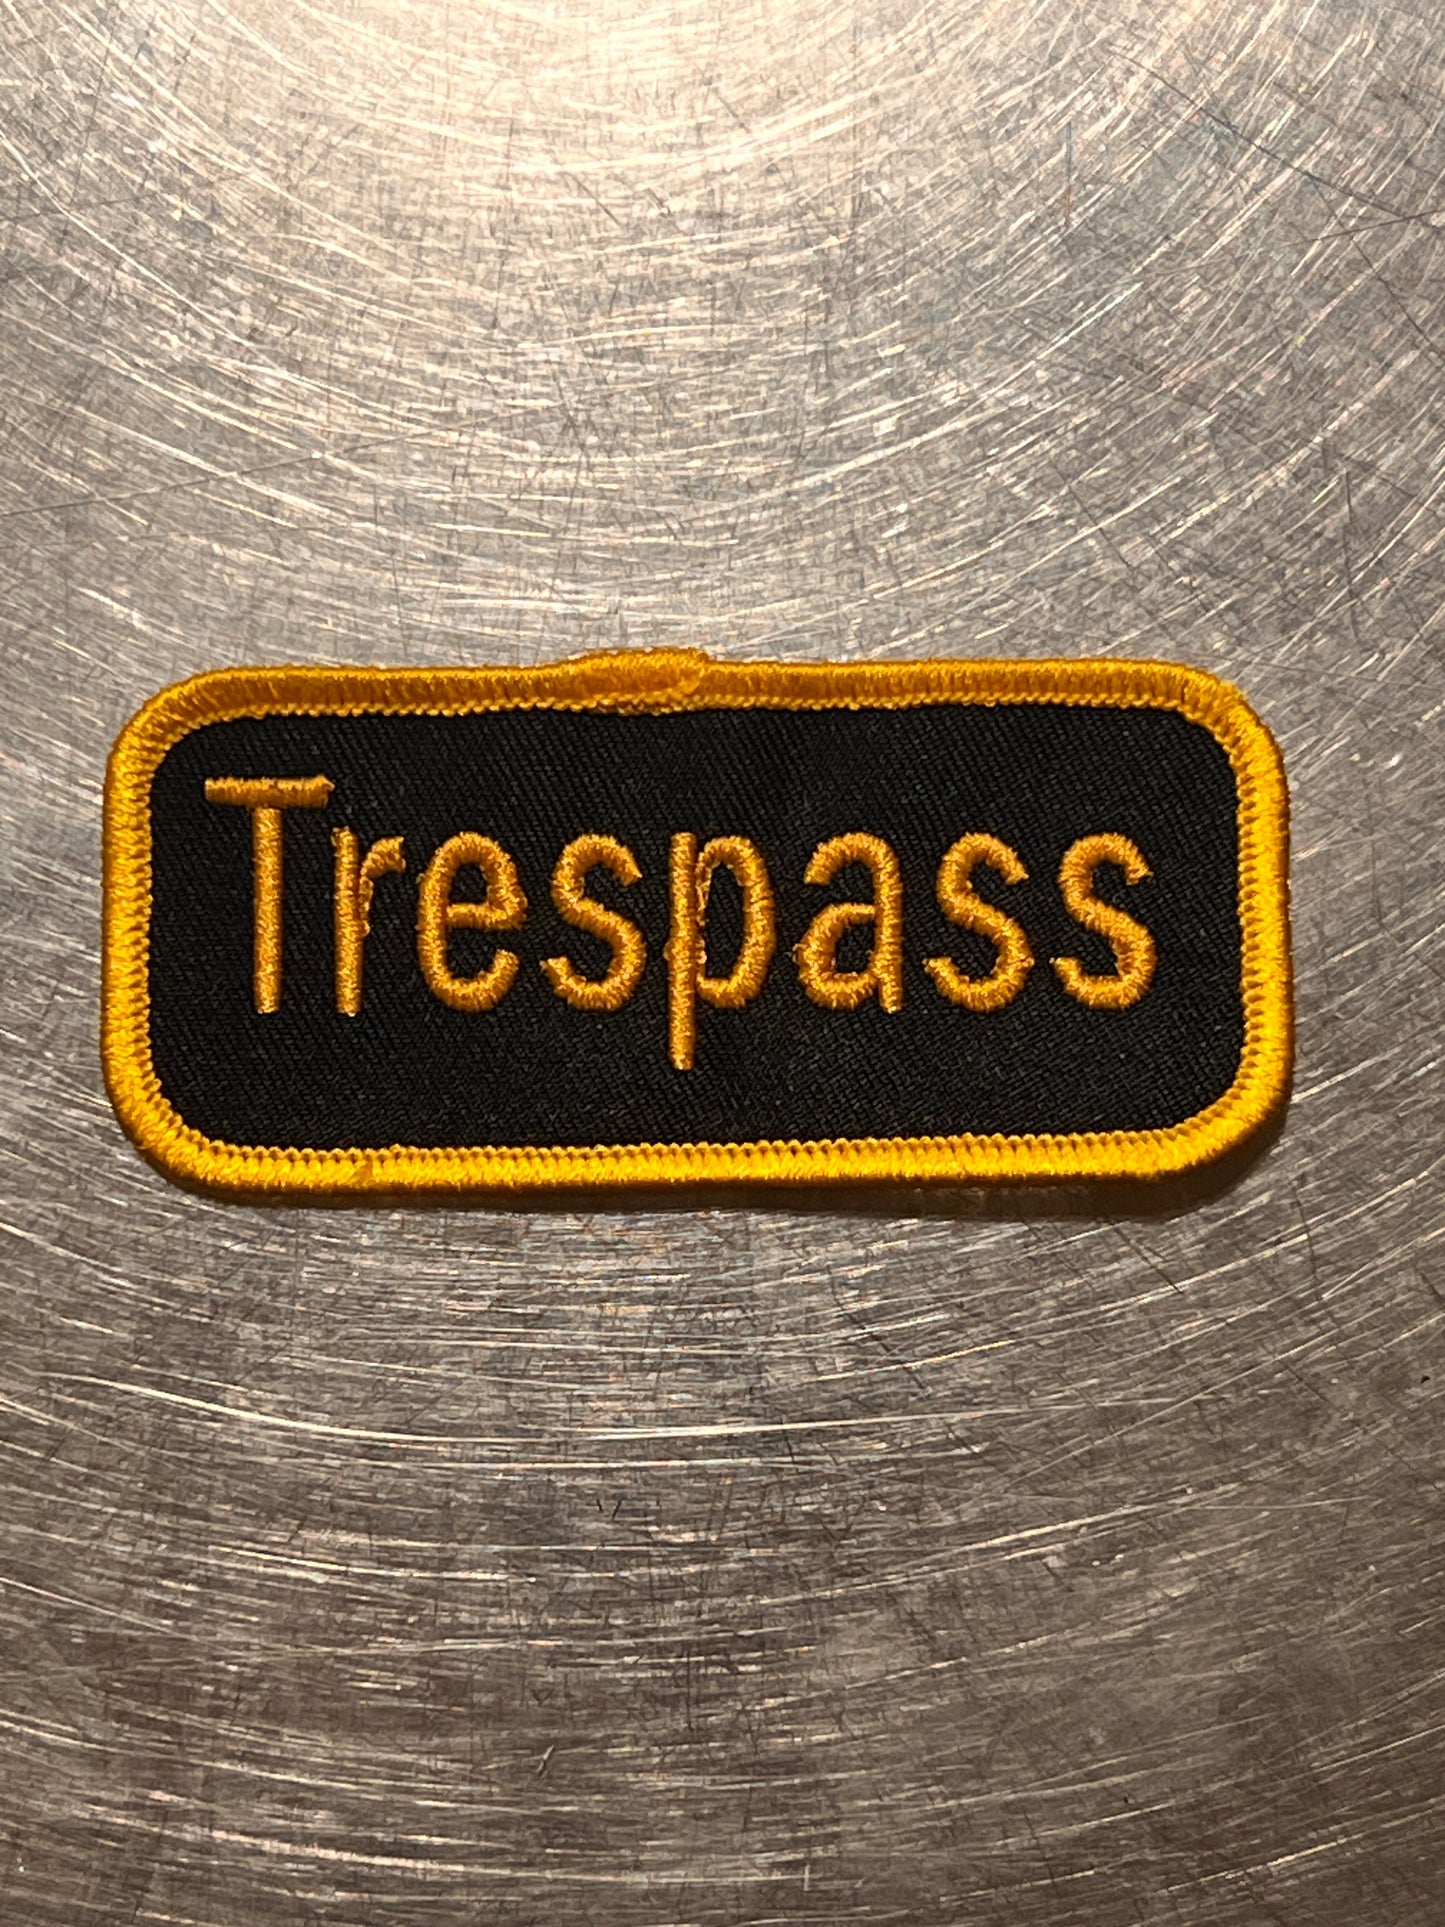 ‘Trespass’ embroidered patch